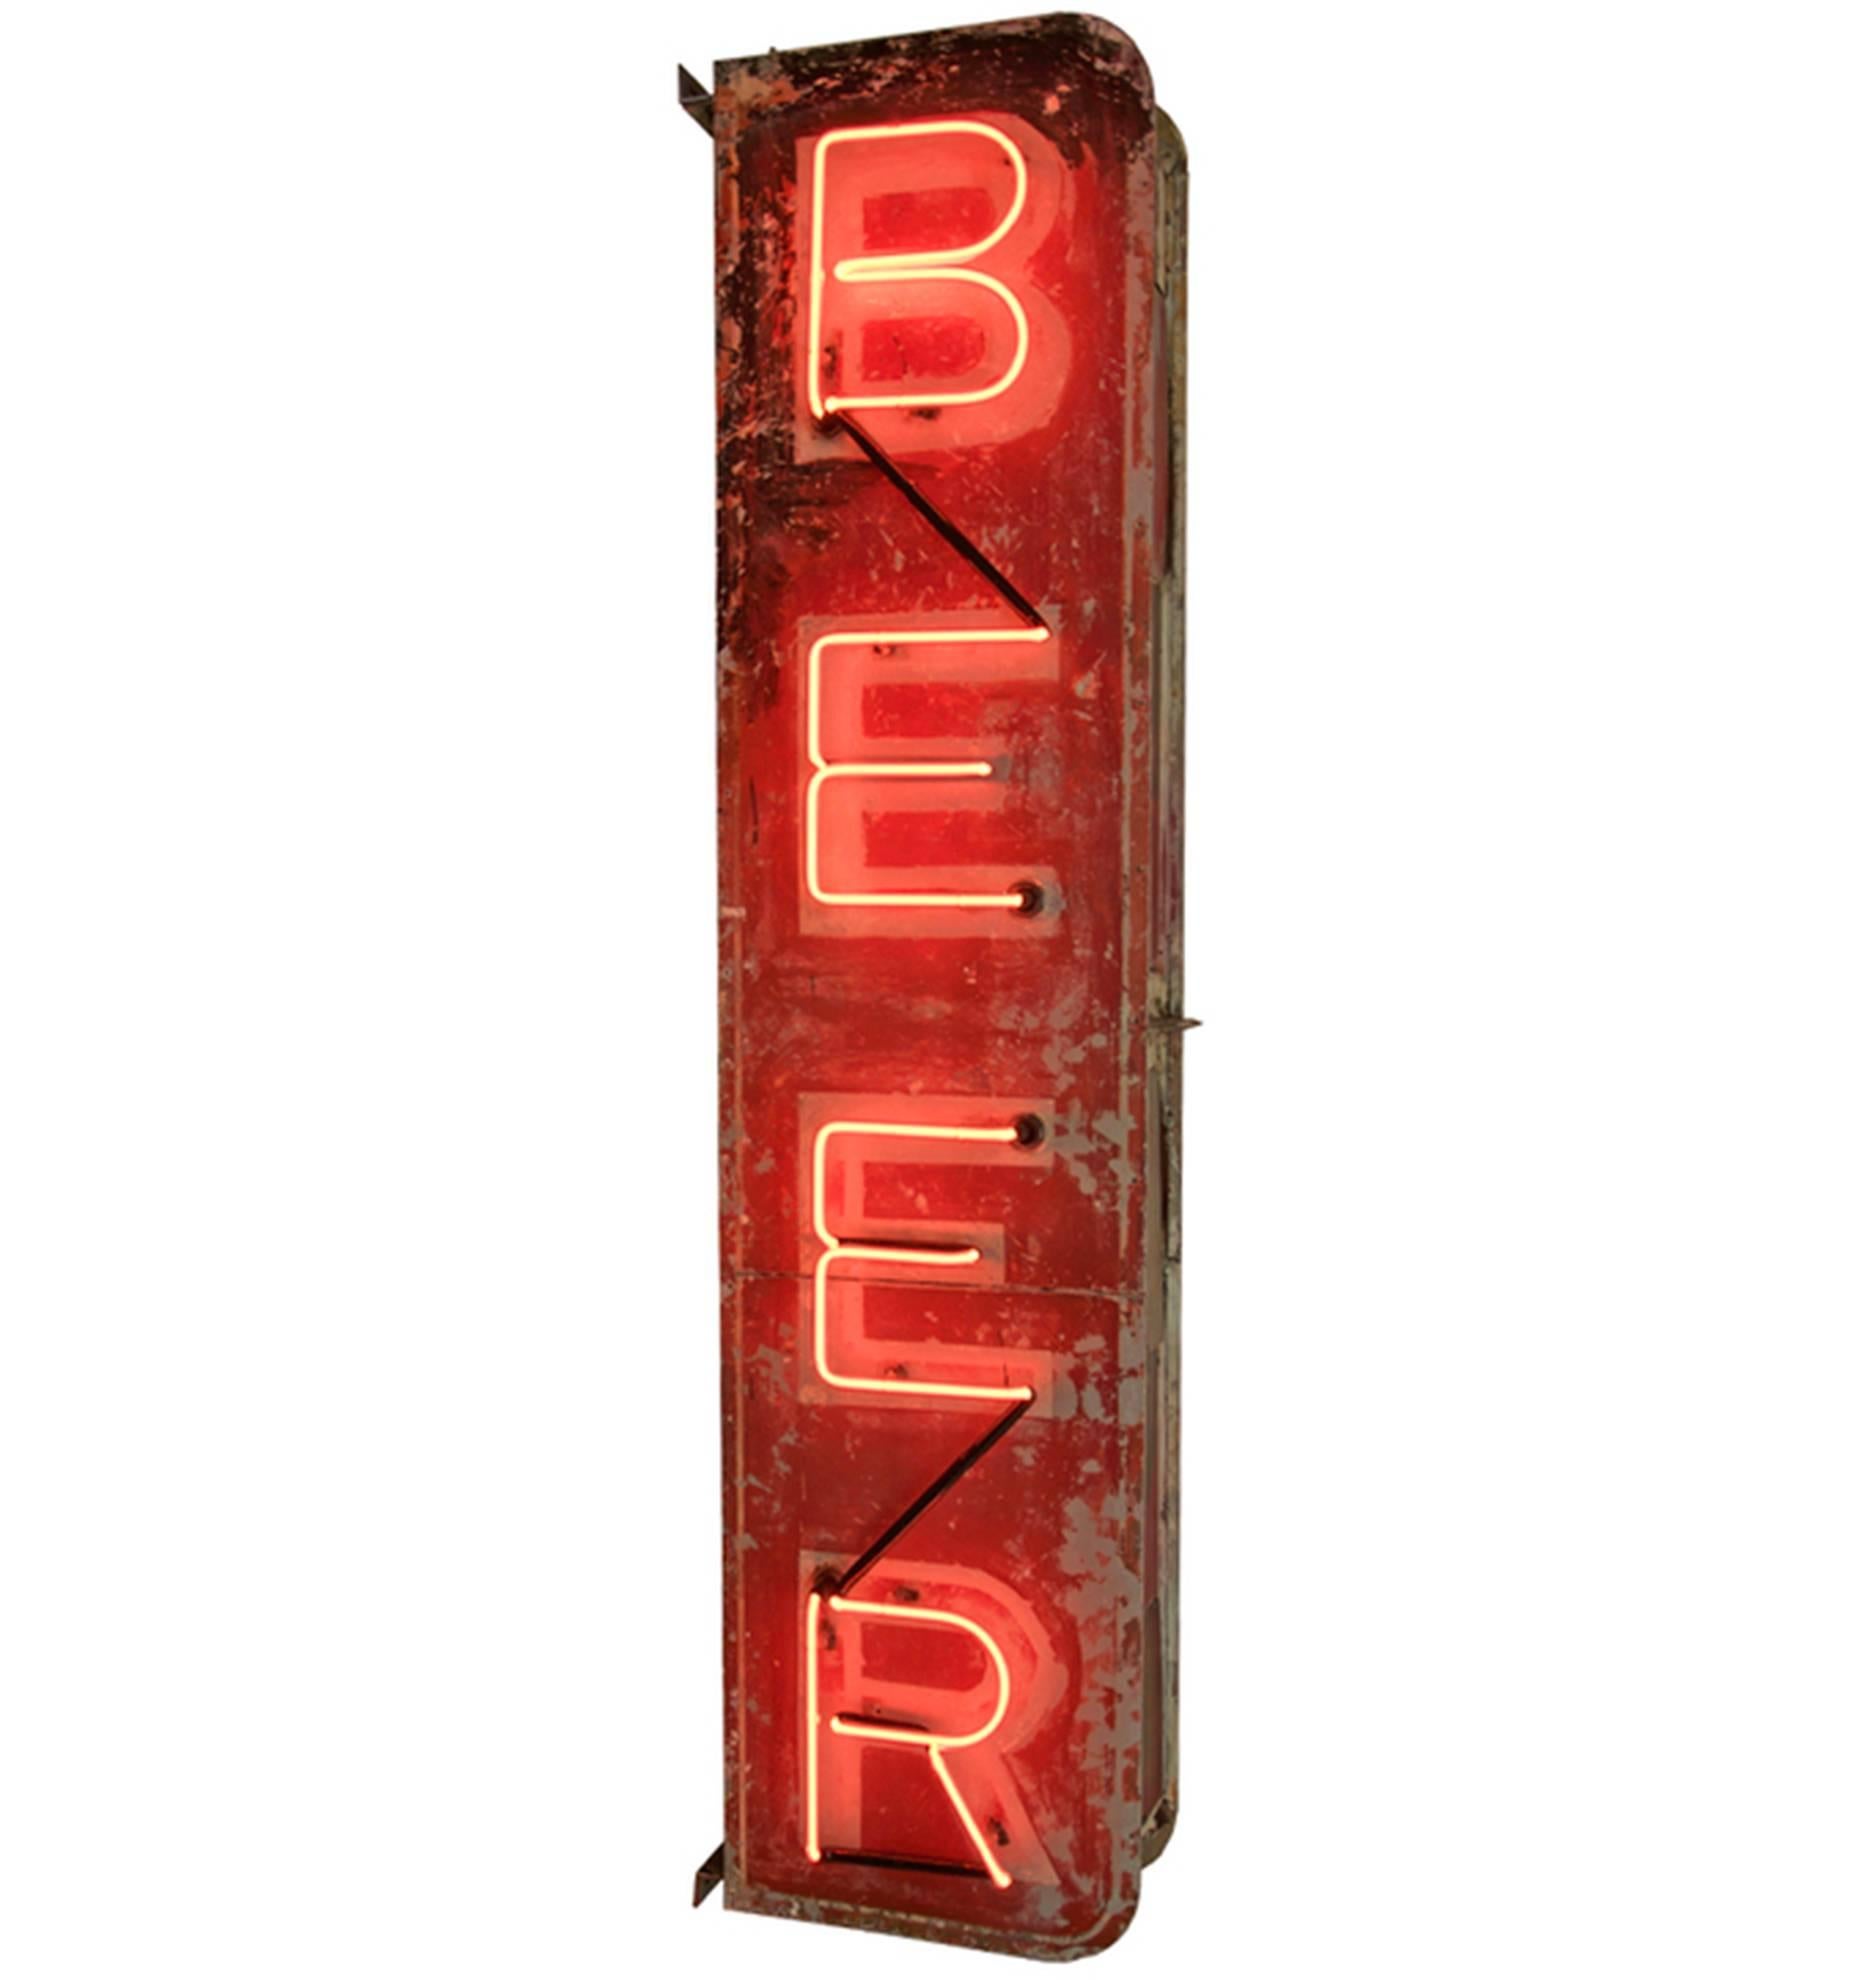 Worn and rusted, we love this reclaimed neon sign almost as much as what it's advertising. Perfect for a bar or restaurant (really, anywhere), this Mid-Century sign boasts a hand-painted red and white composition, with glowing red neon. While the